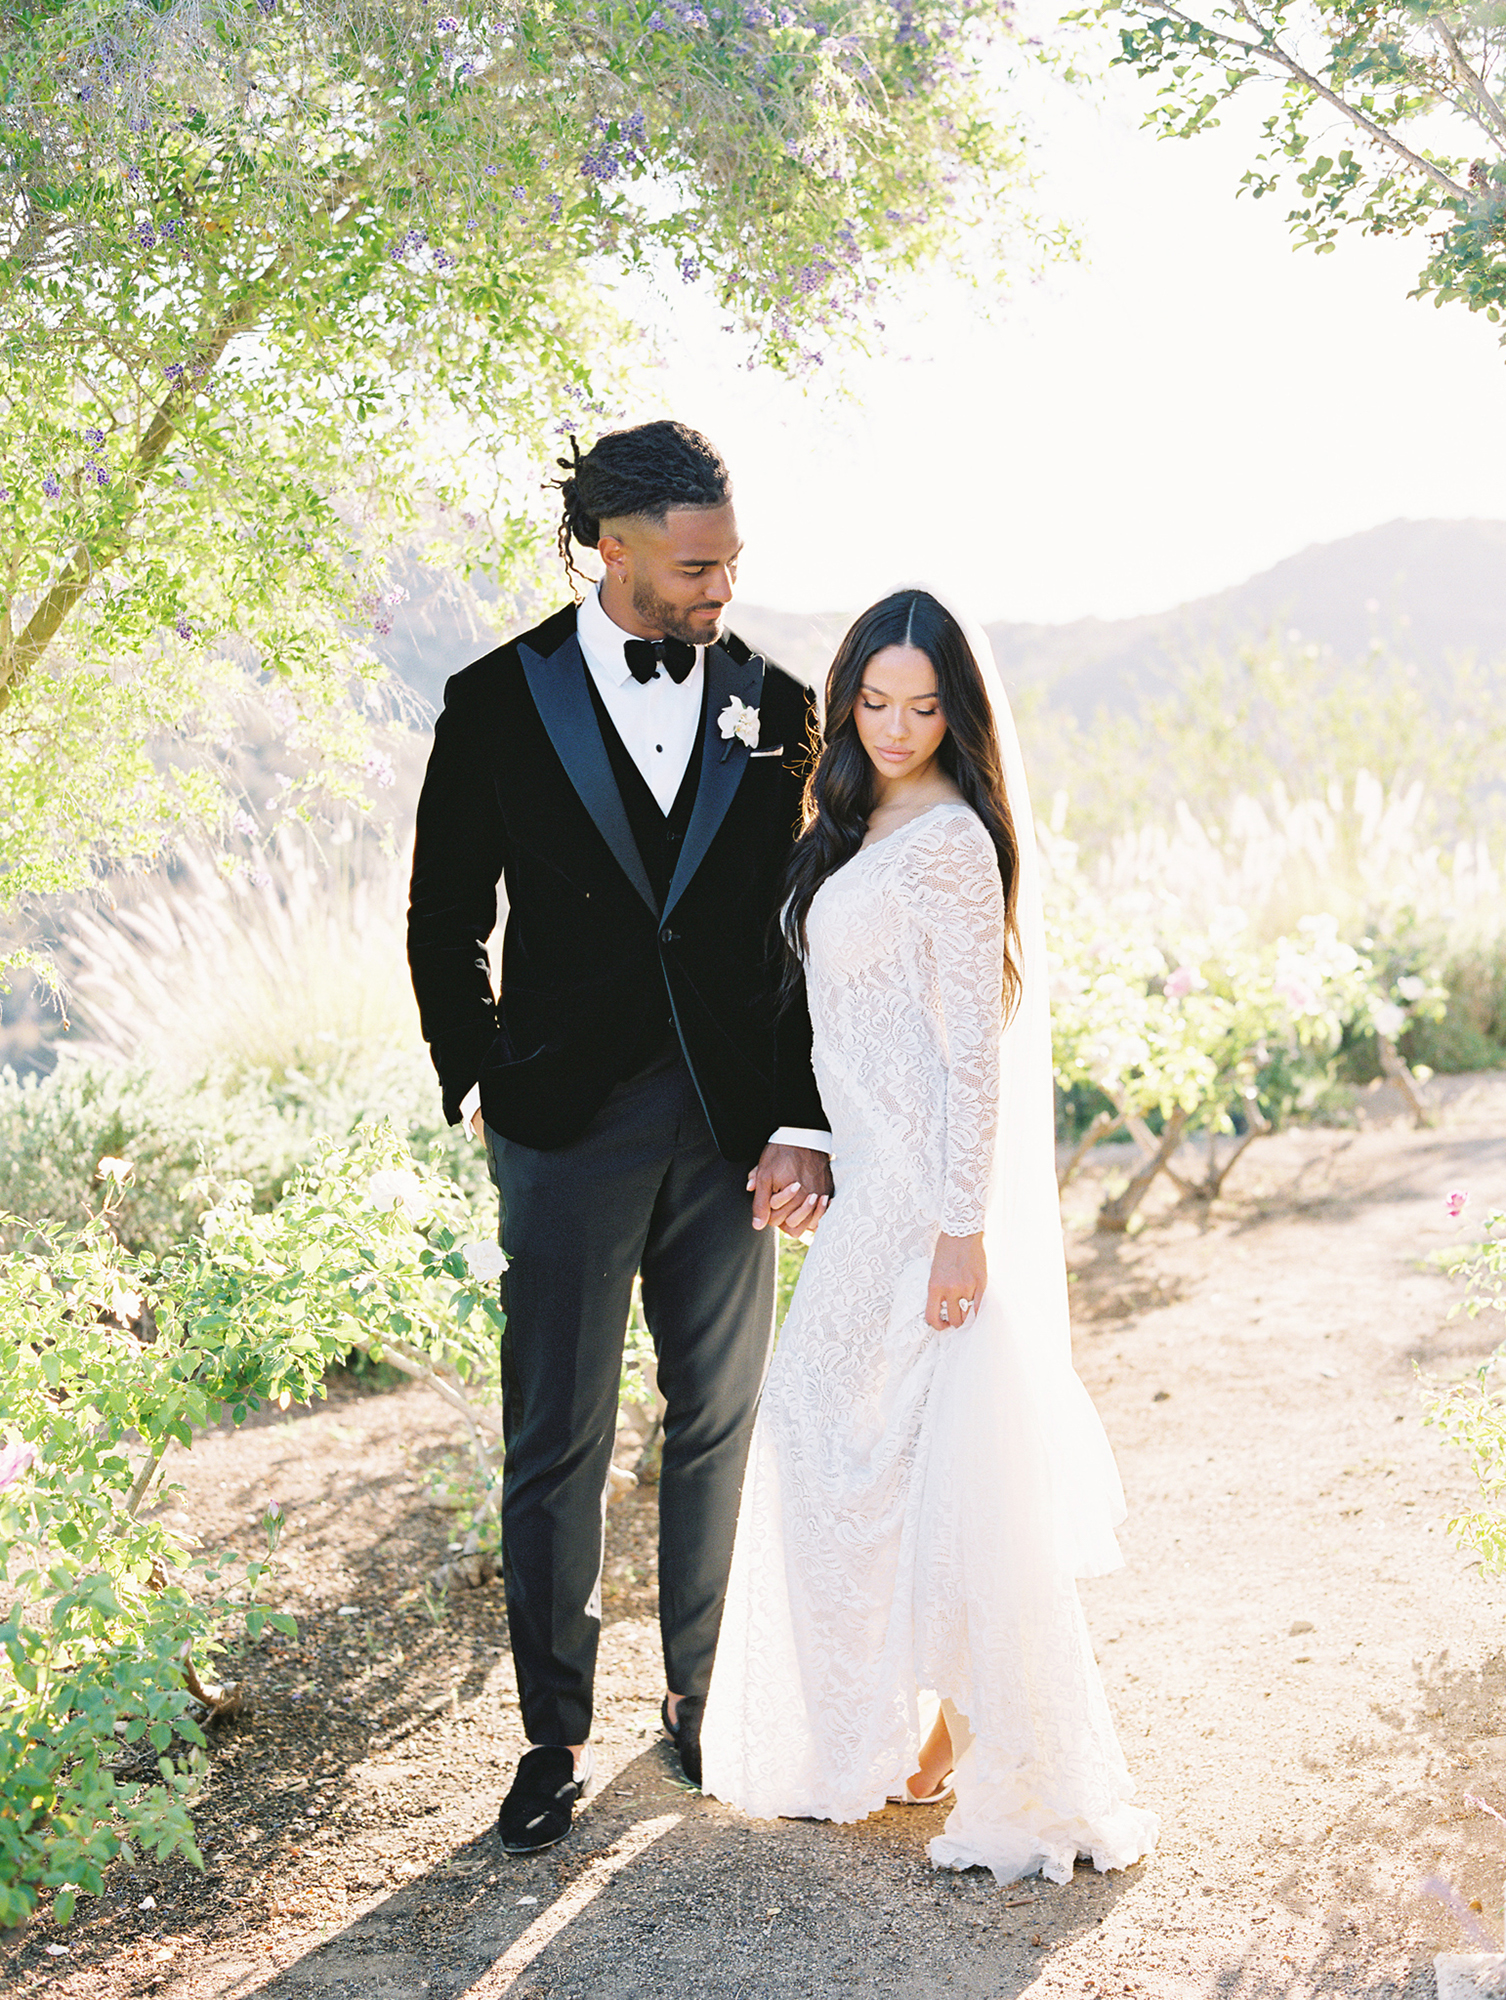 Bachelor's Sydney Hightower on Wedding Planning With 49ers' Fred Warner